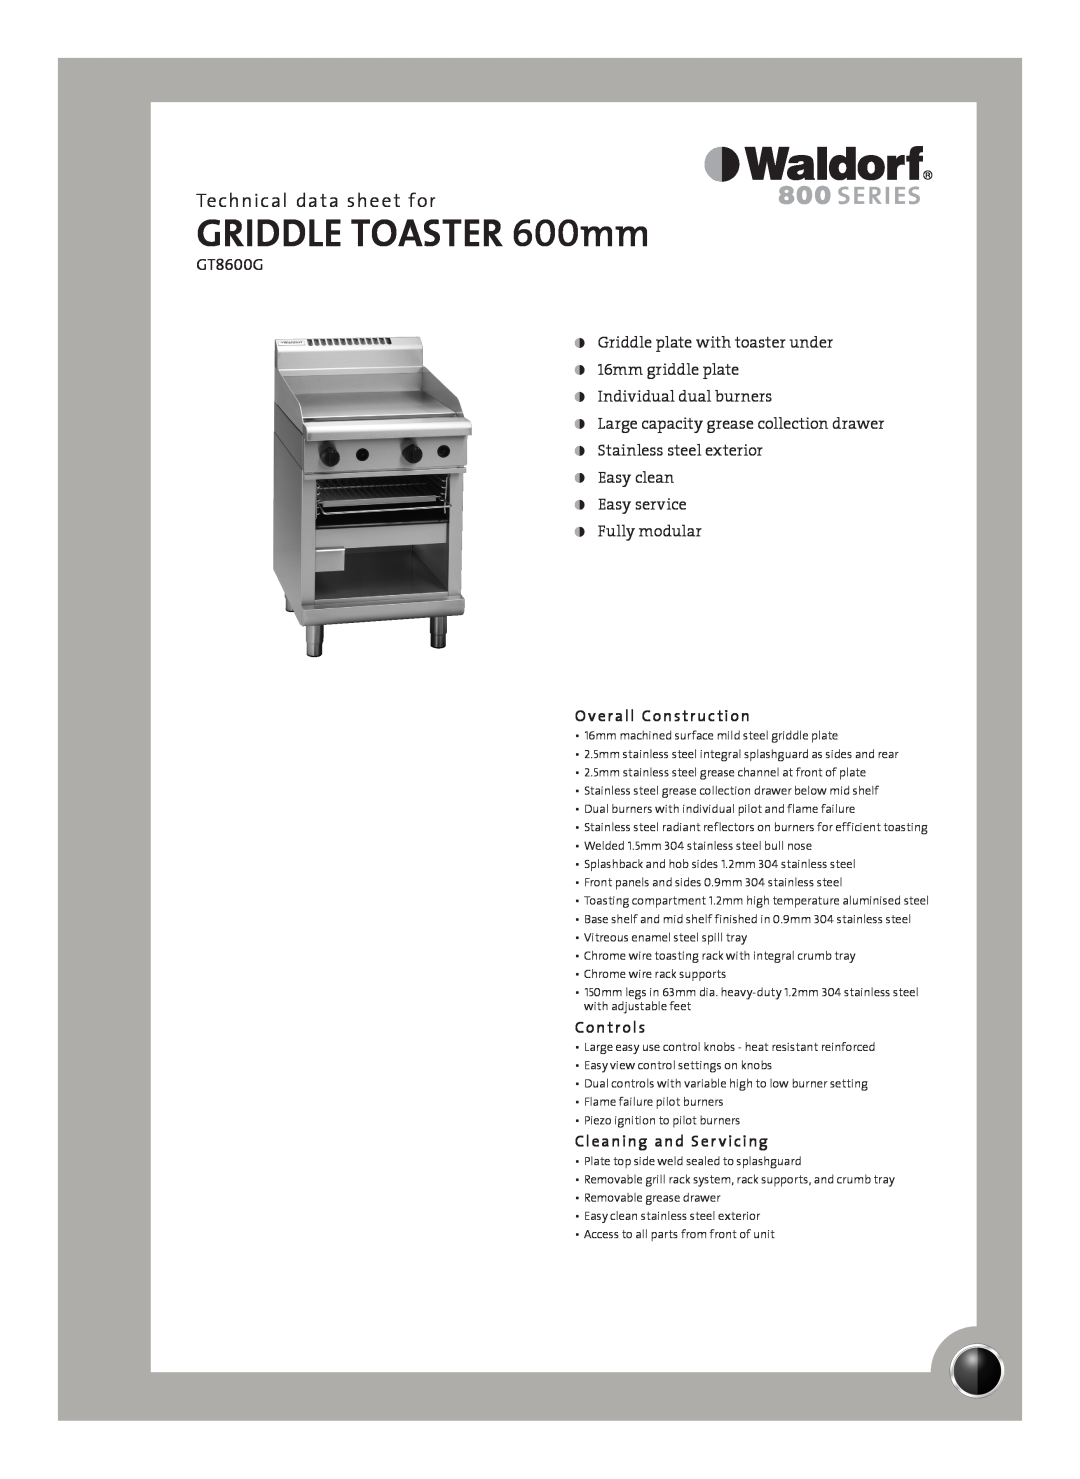 Moffat GT8600G manual Technical data sheet for, Overall Construction, Controls, Cleaning and Ser vicing 